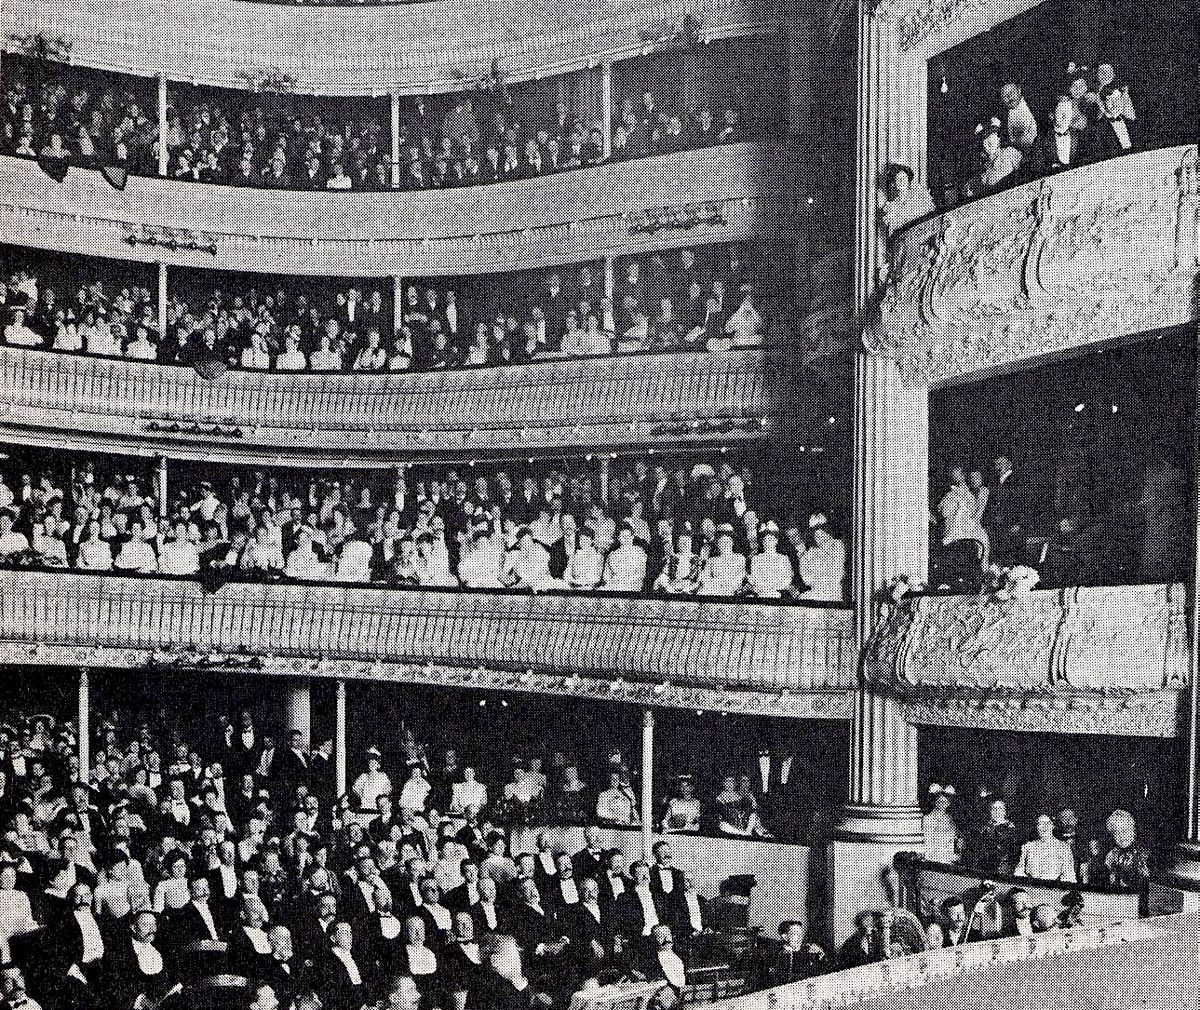 This 1901 photograph shows New Orleans's historic French Opera House with a packed house on the opening night of a new opera.